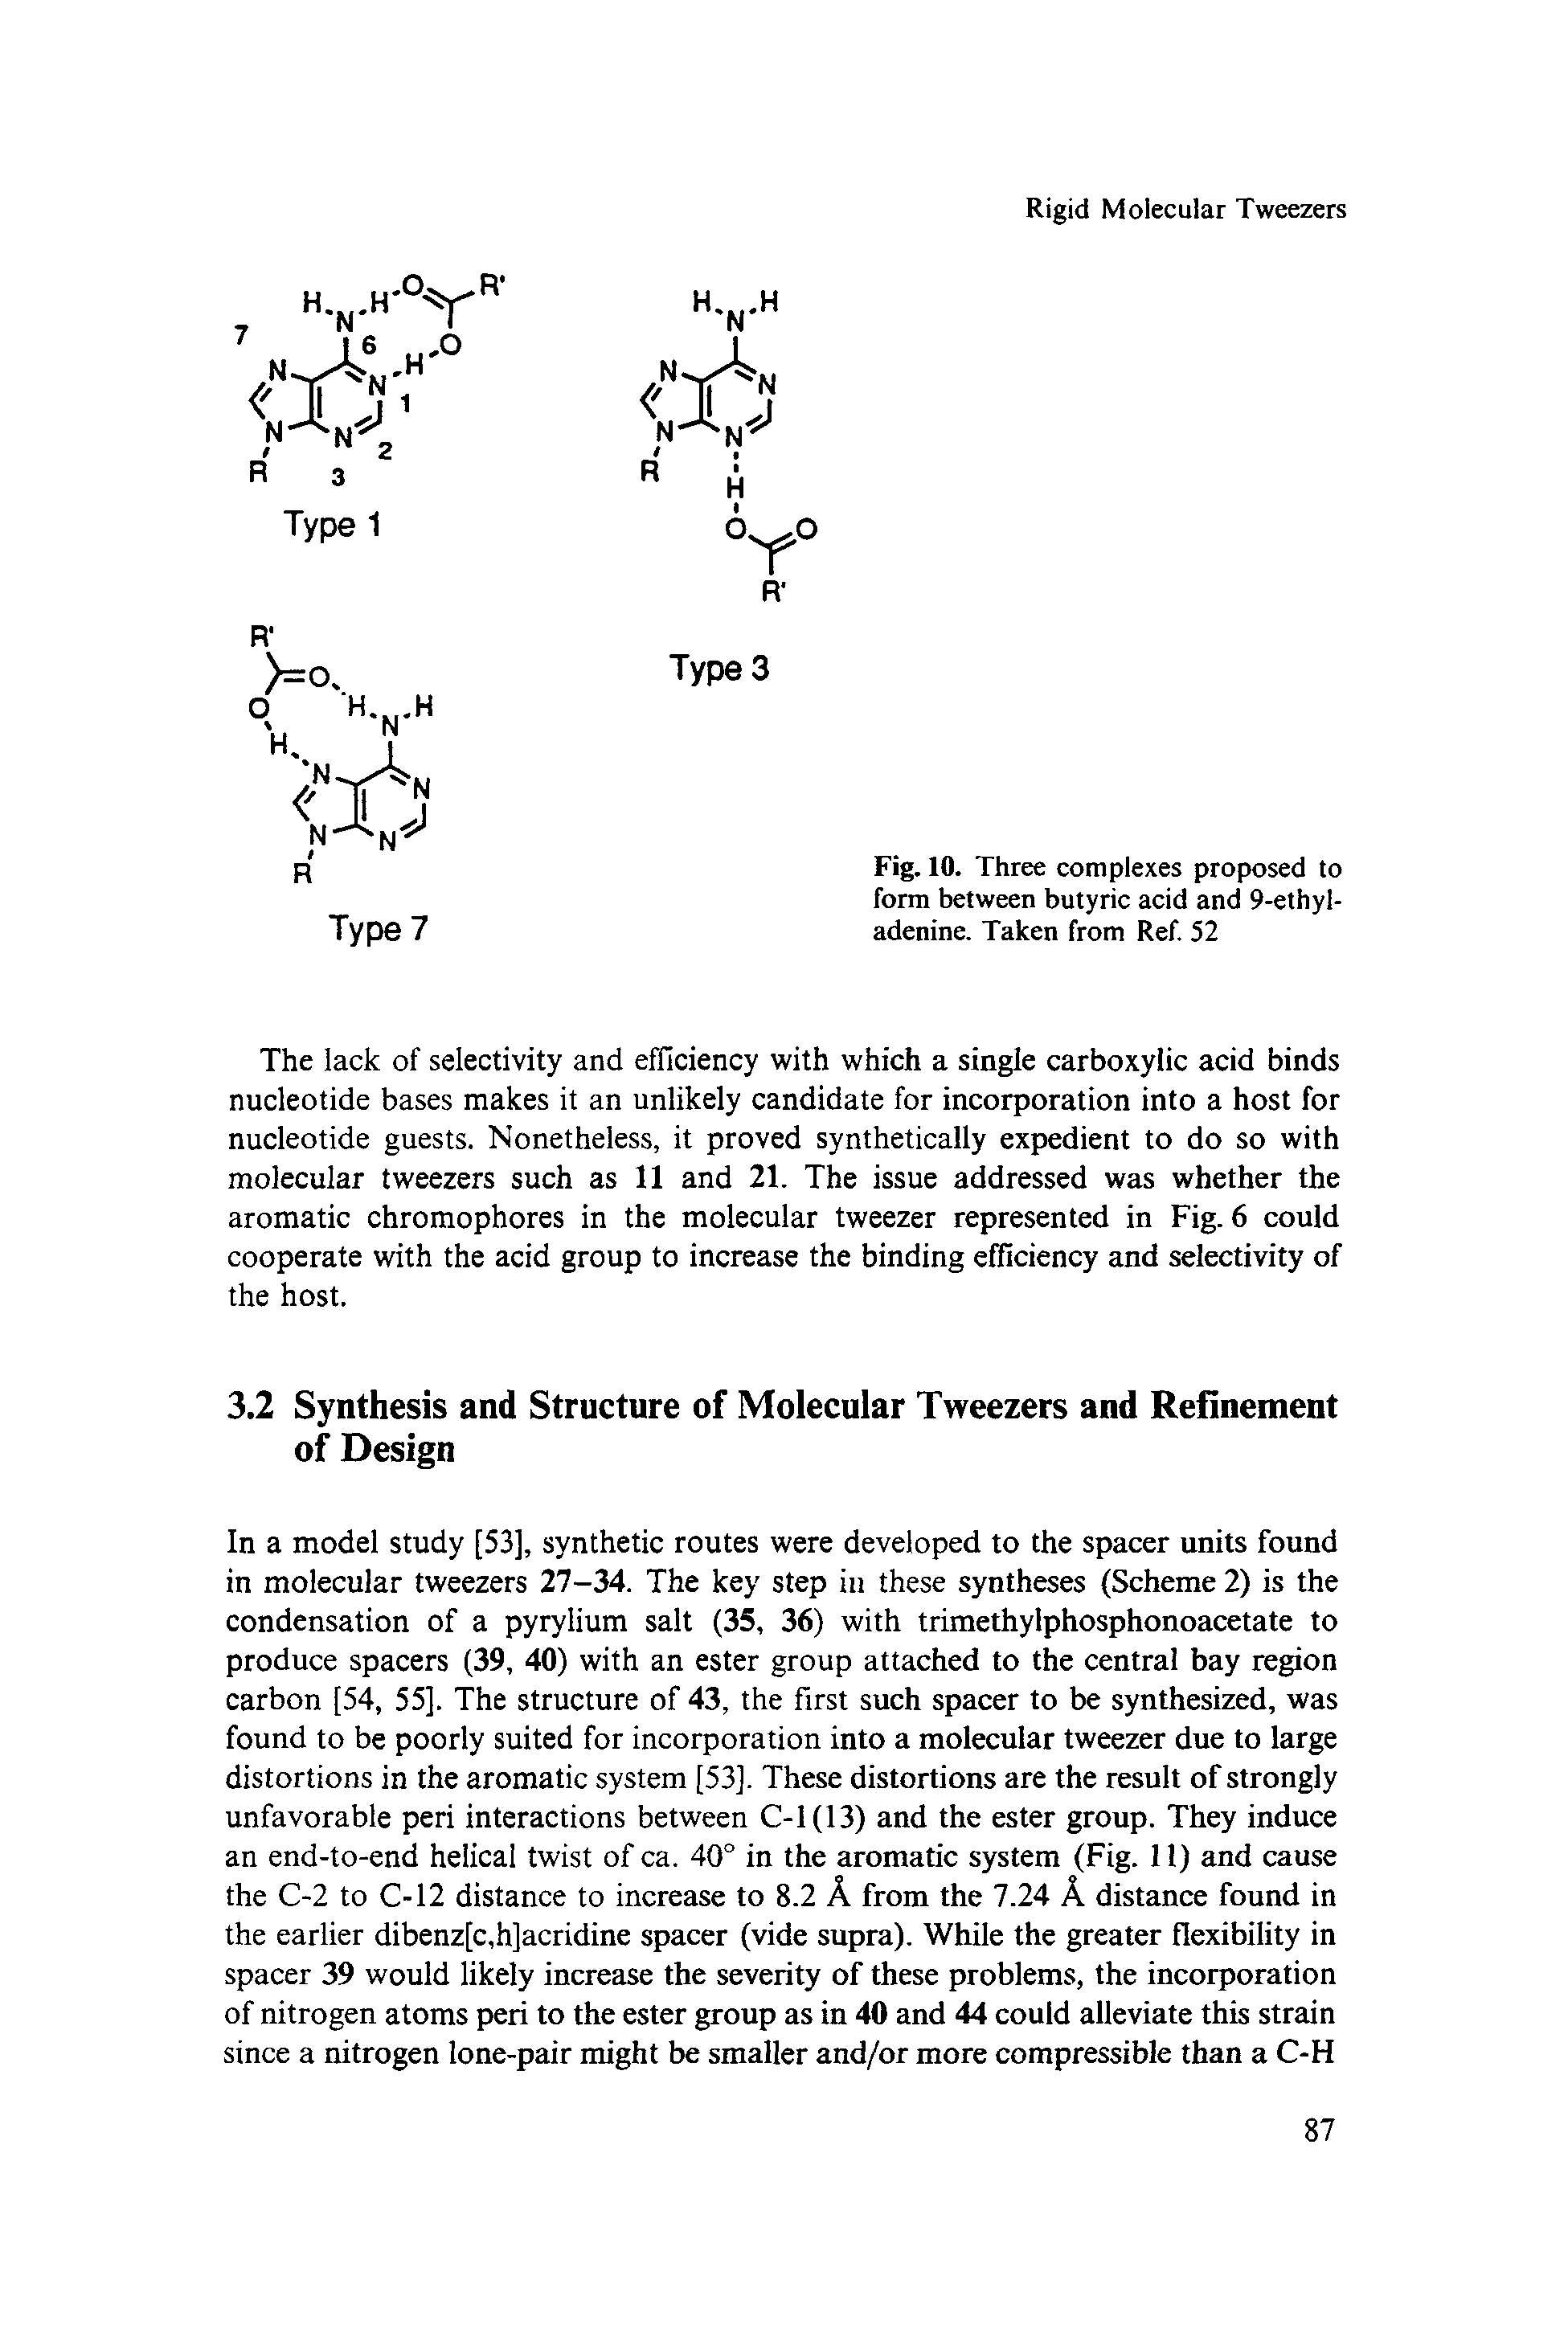 Fig. 10. Three complexes proposed to form between butyric acid and 9-ethyl-adenine. Taken from Ref. 52...